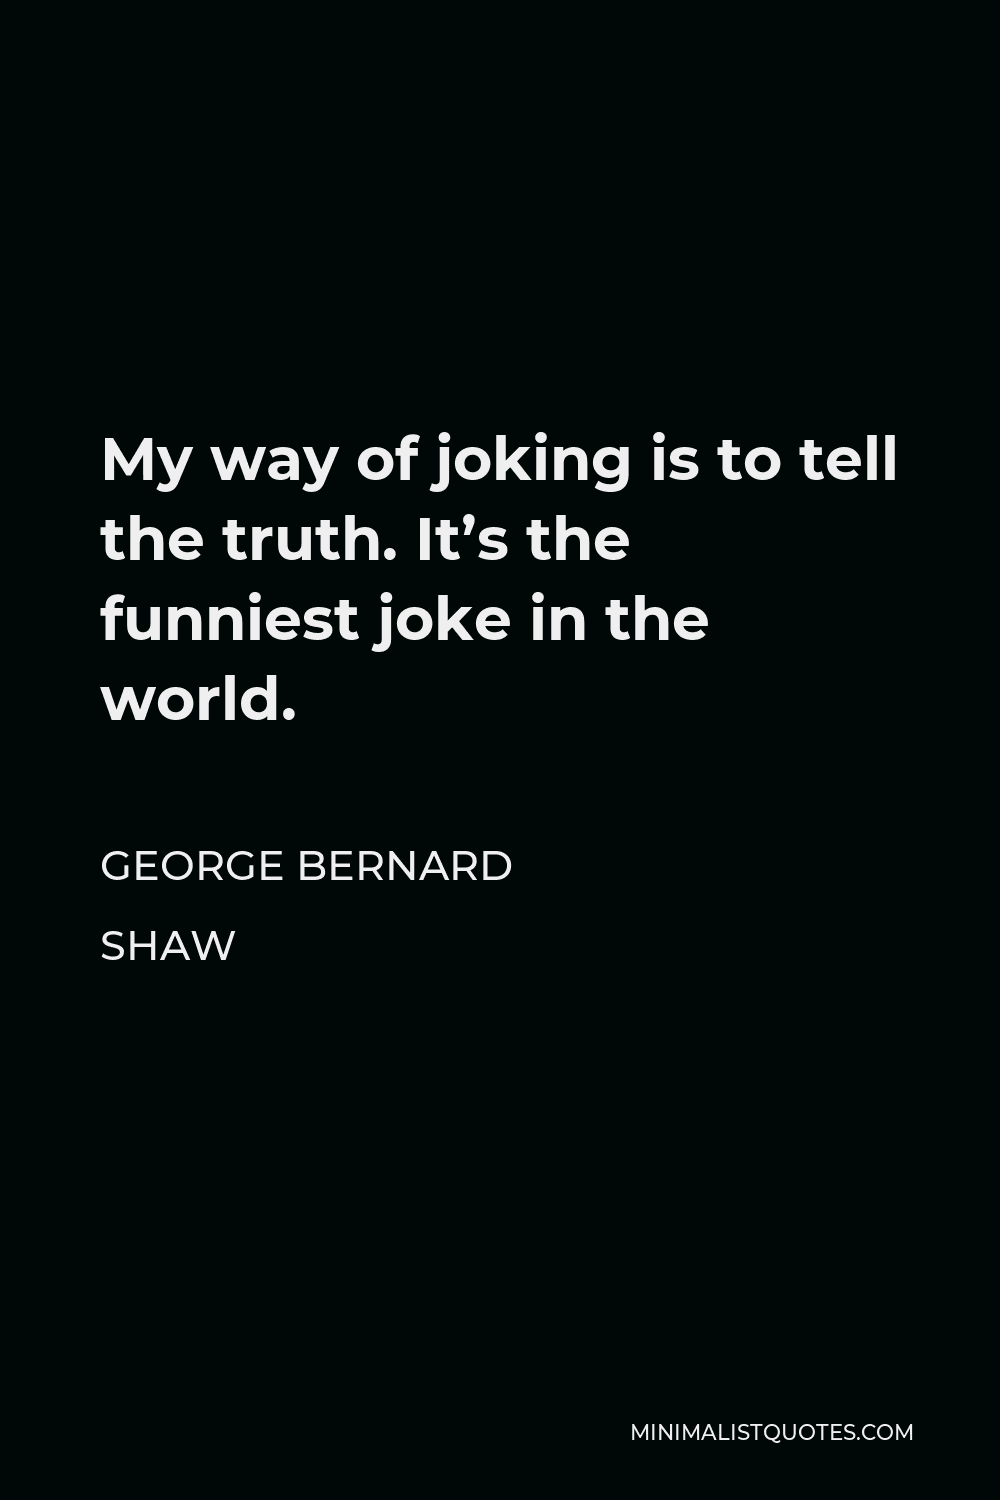 George Bernard Shaw Quote - My way of joking is to tell the truth. It’s the funniest joke in the world.